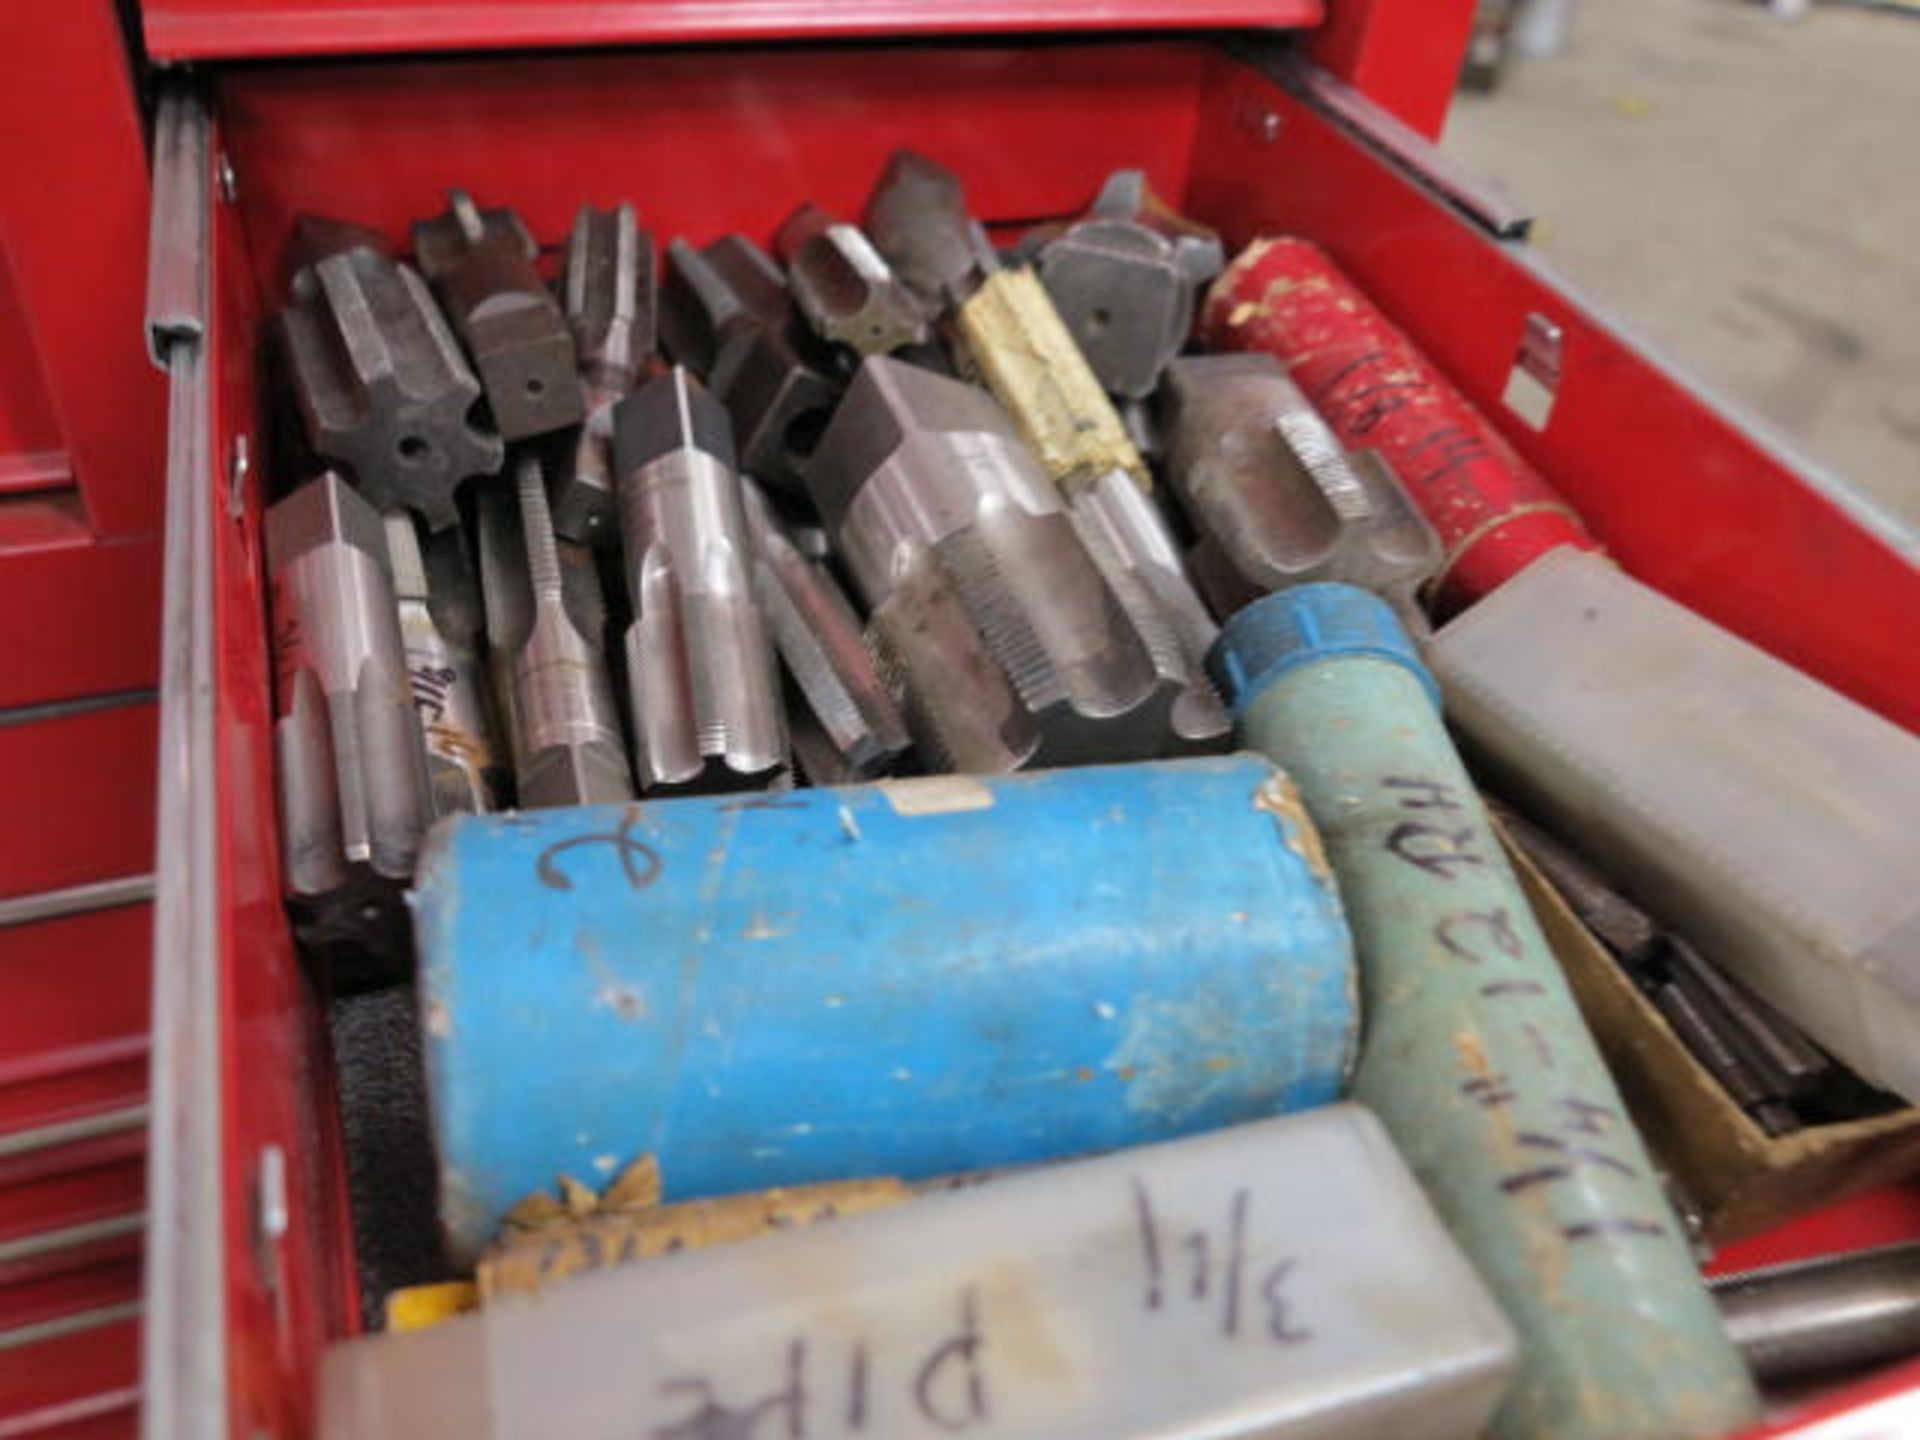 Mechanics Tool Chest Loaded with Tools Located at 93 Macondrey St Cumberland, RI - Image 5 of 6